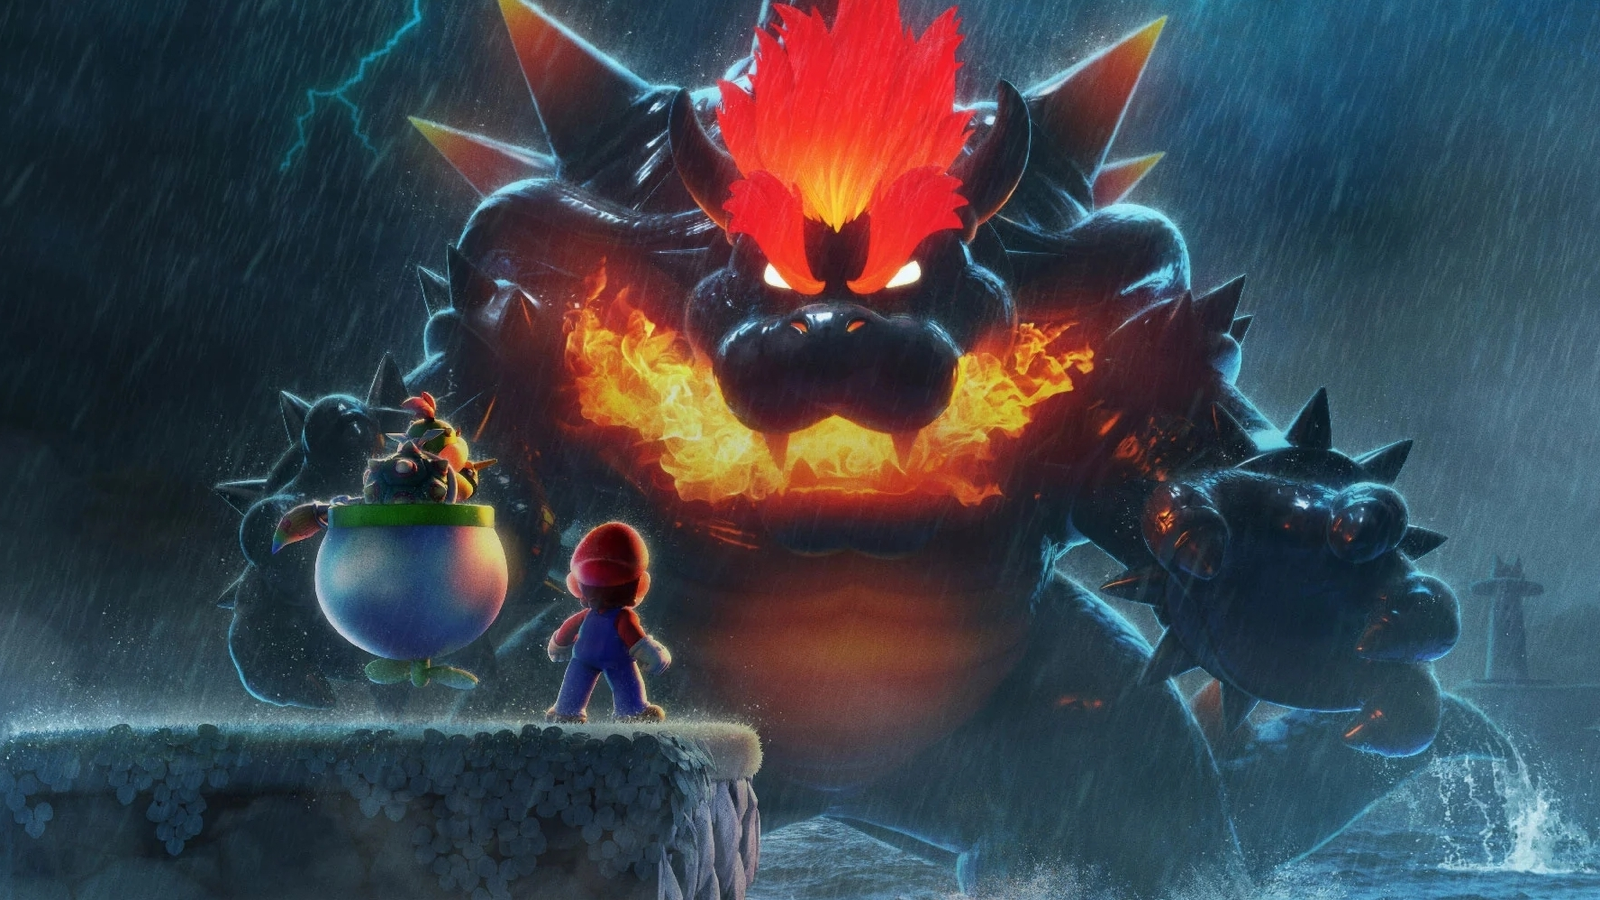 Super Mario 3D World + Bowser's Fury review: the best of Mario